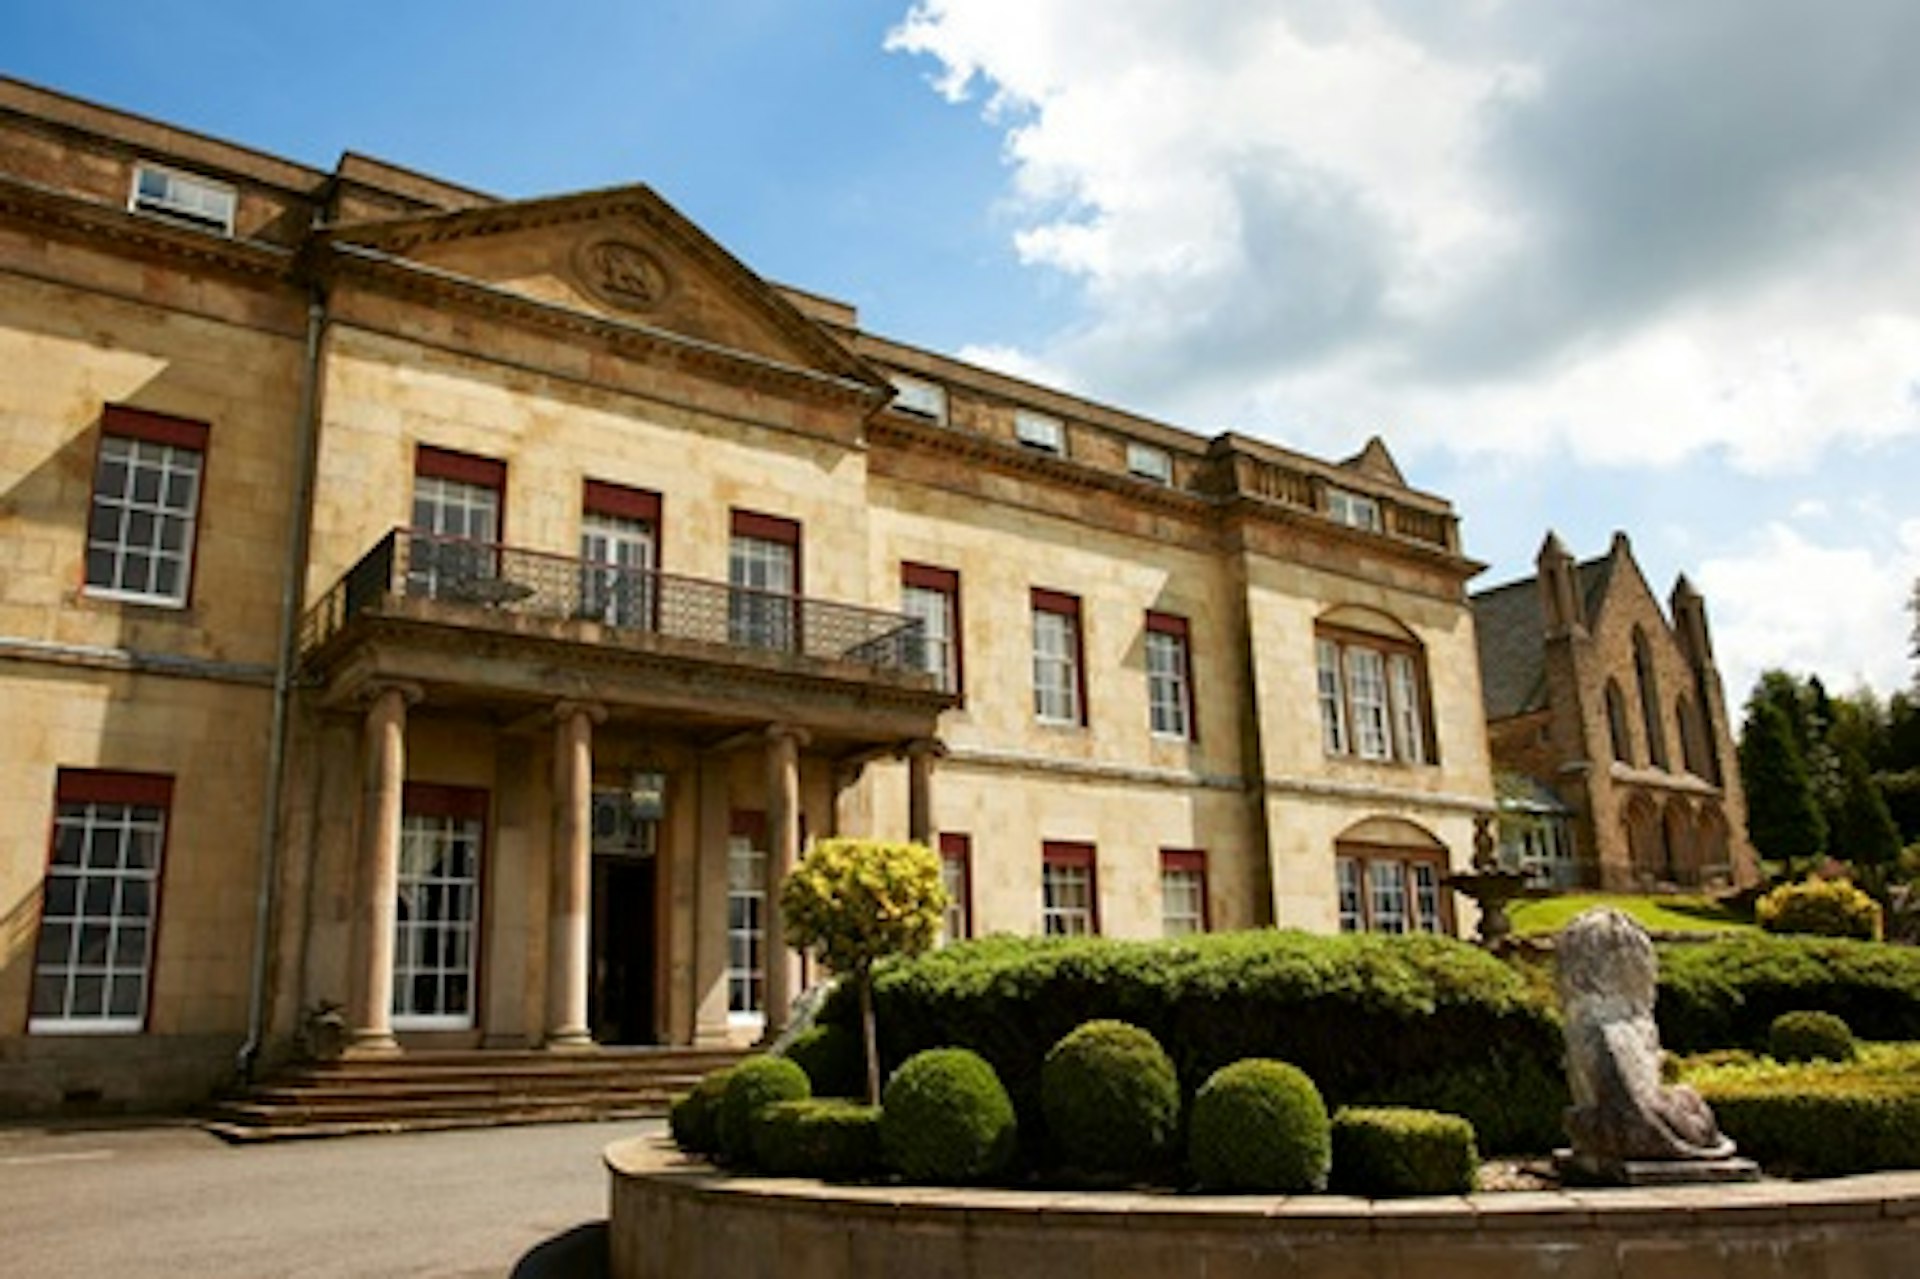 Two Night Peak District Break for Two at The Shrigley Hall Hotel & Spa 1